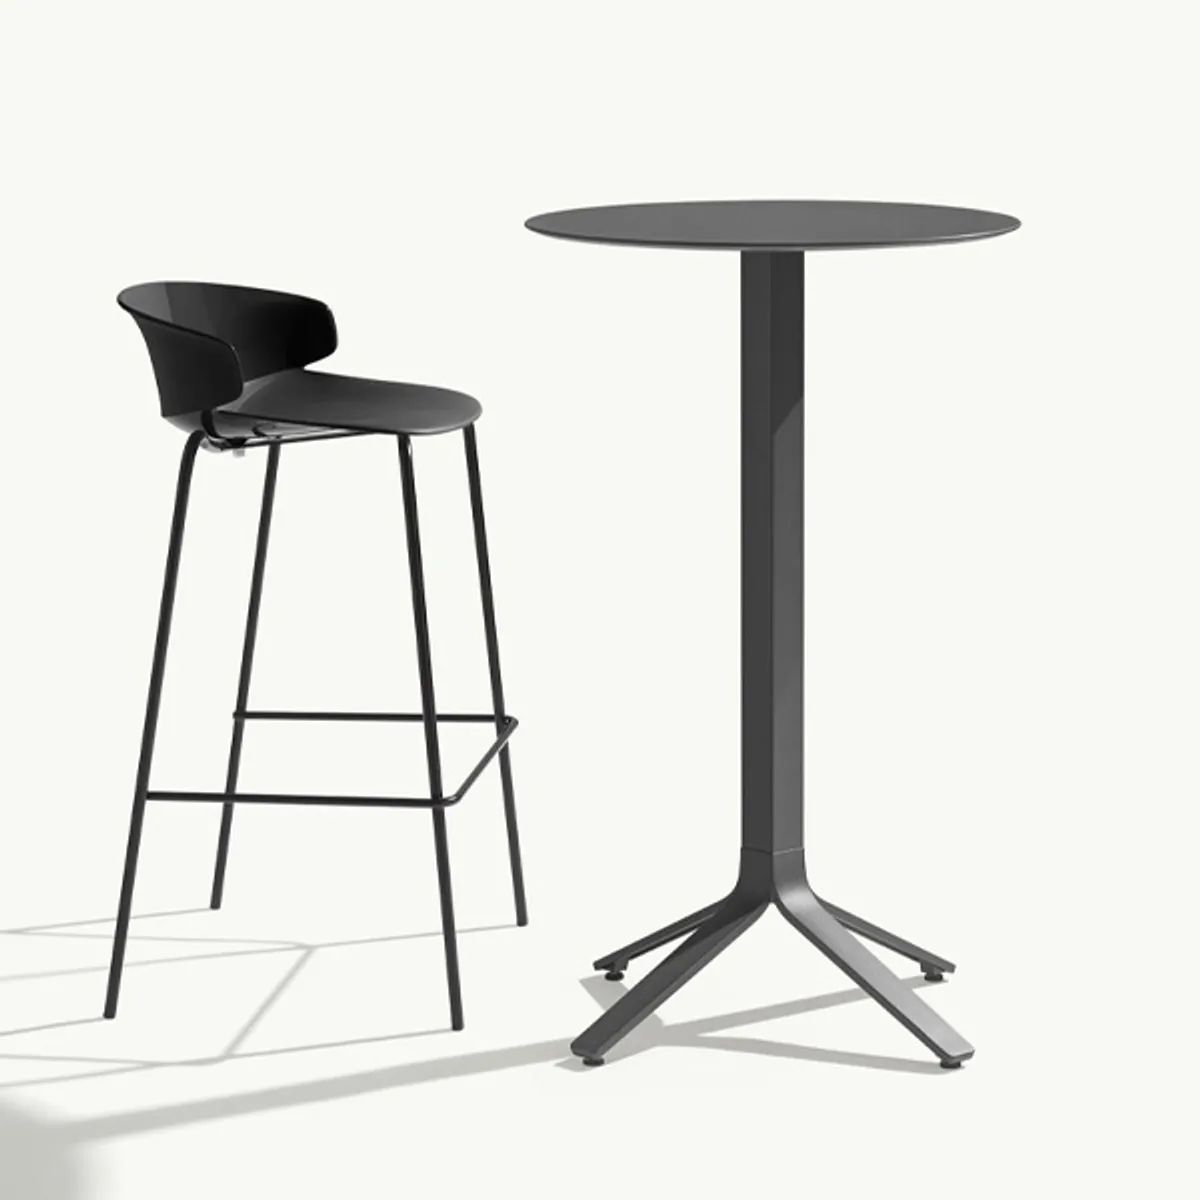 Classy bar stool Inside Out Contracts2